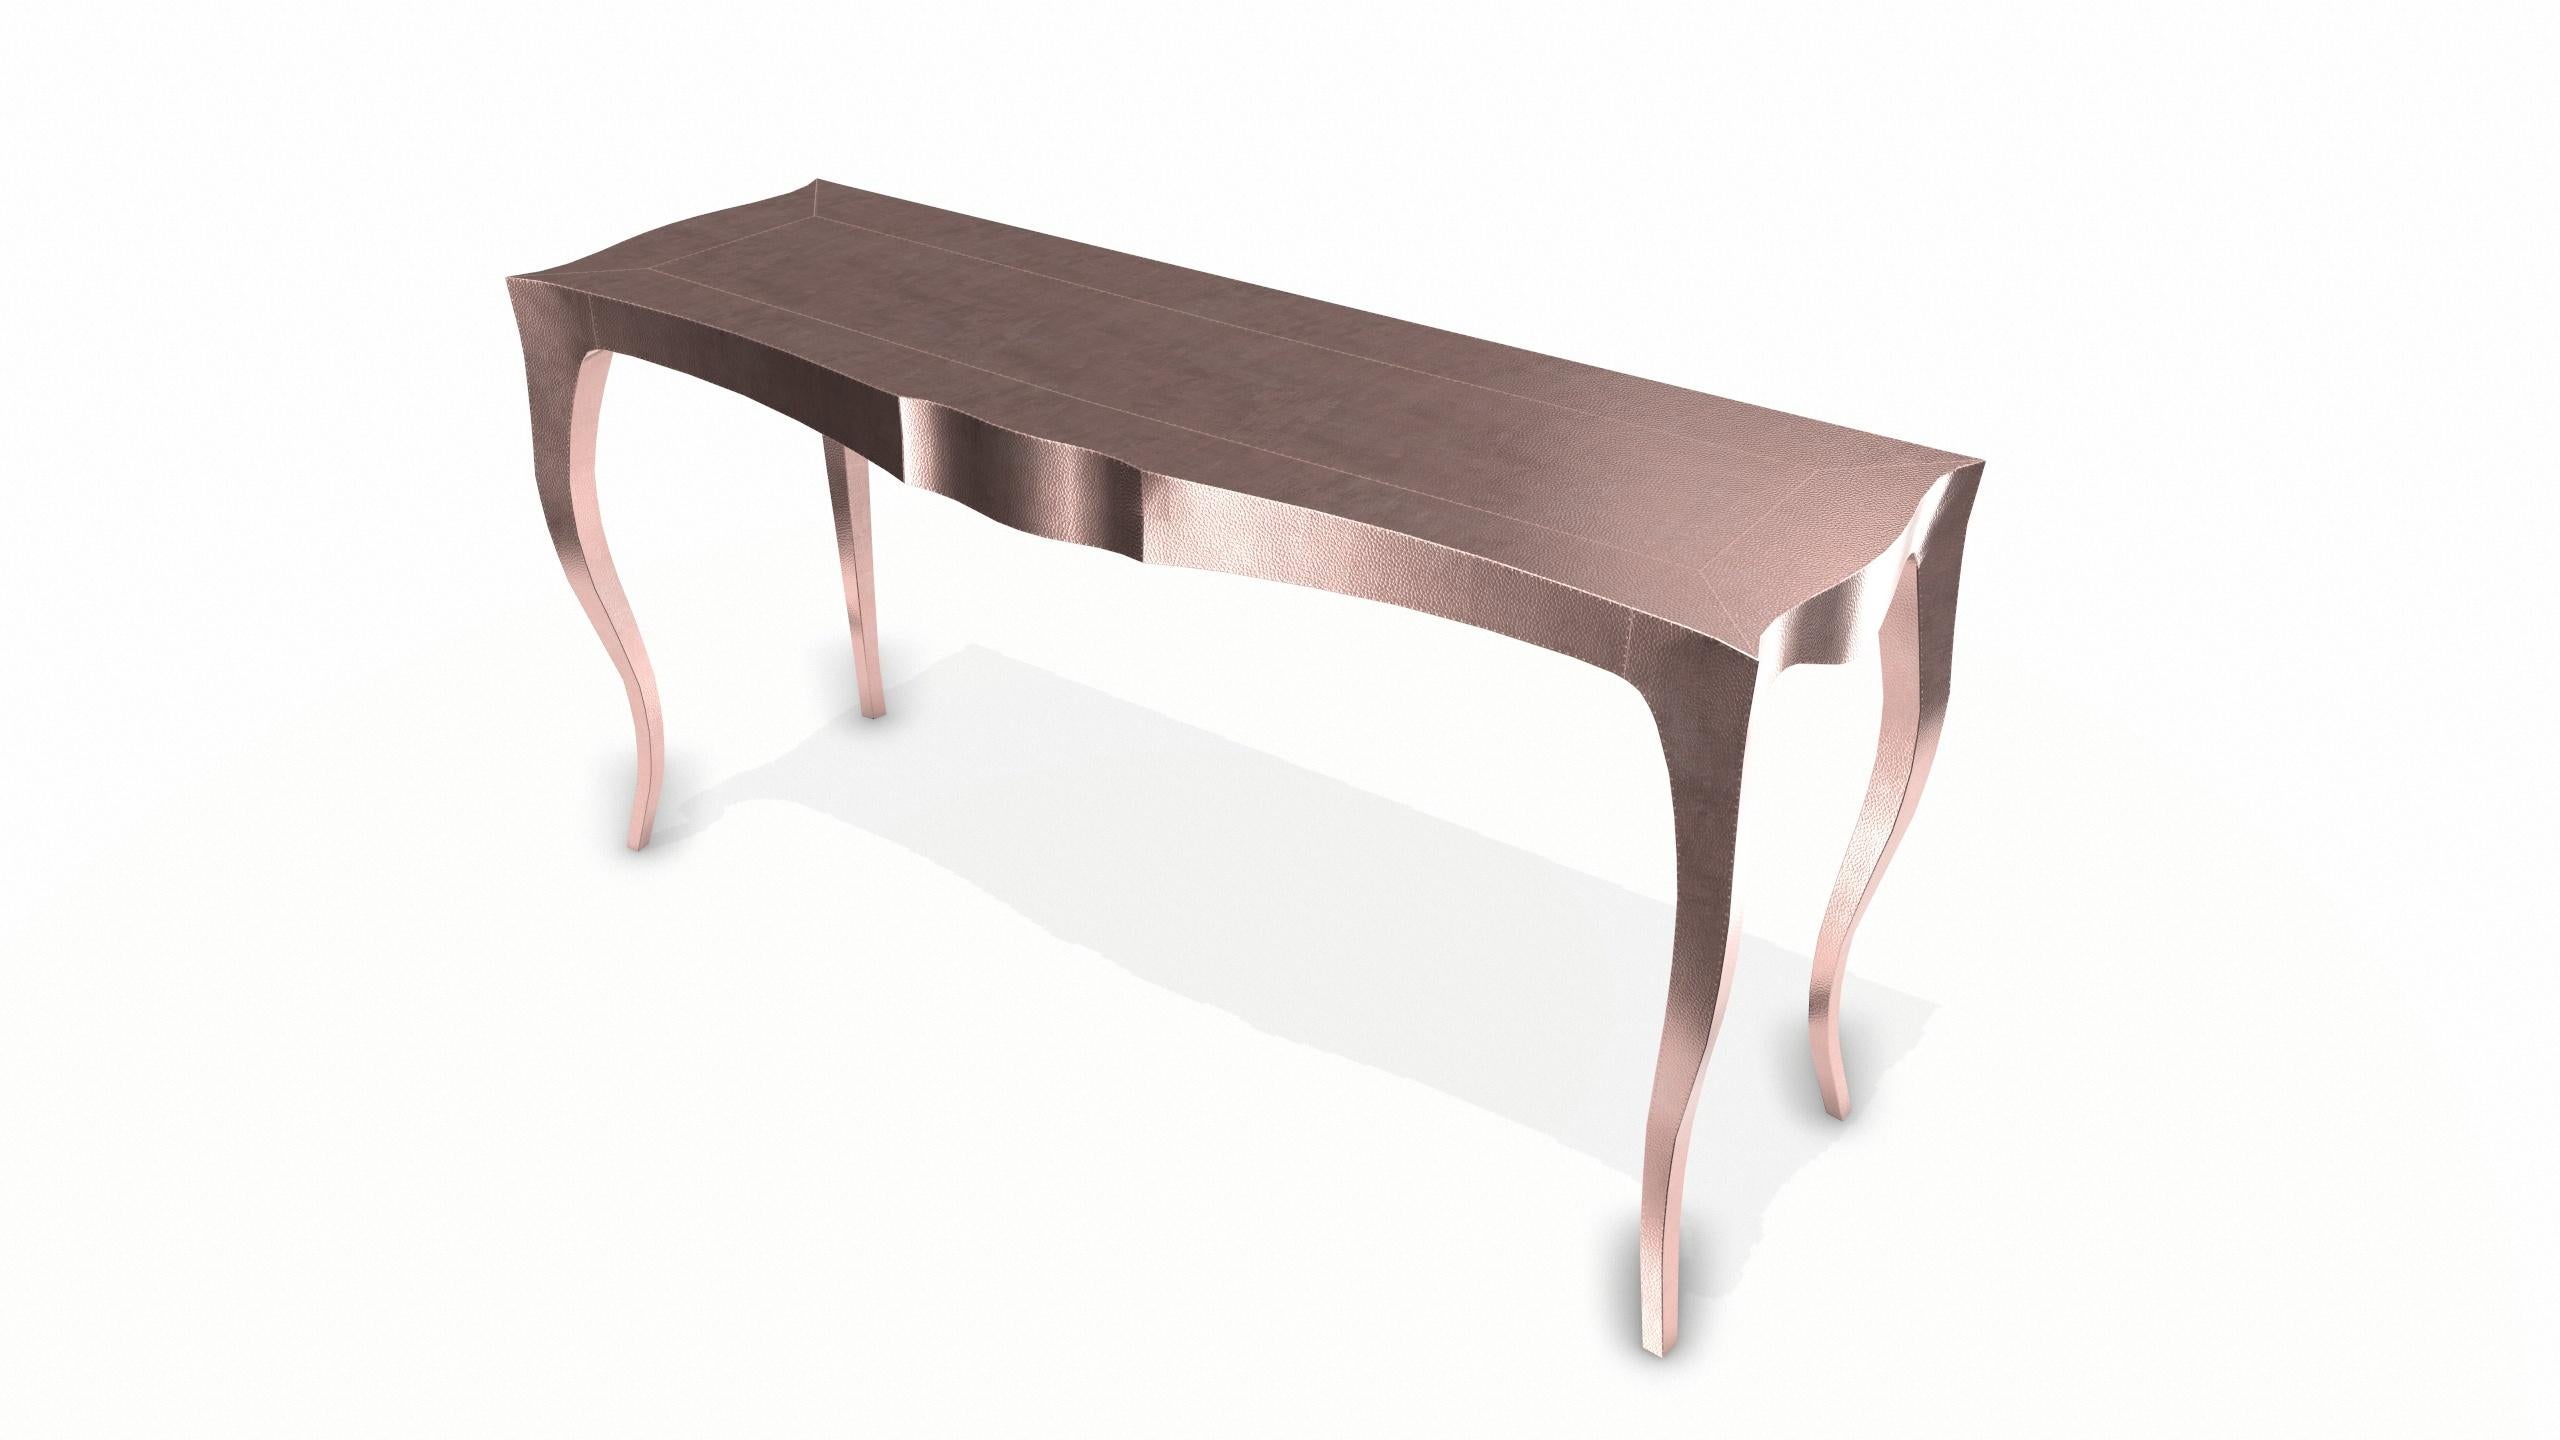 Other Louise Console Art Deco Industrial and Work Tables Mid. Hammered Copper  For Sale